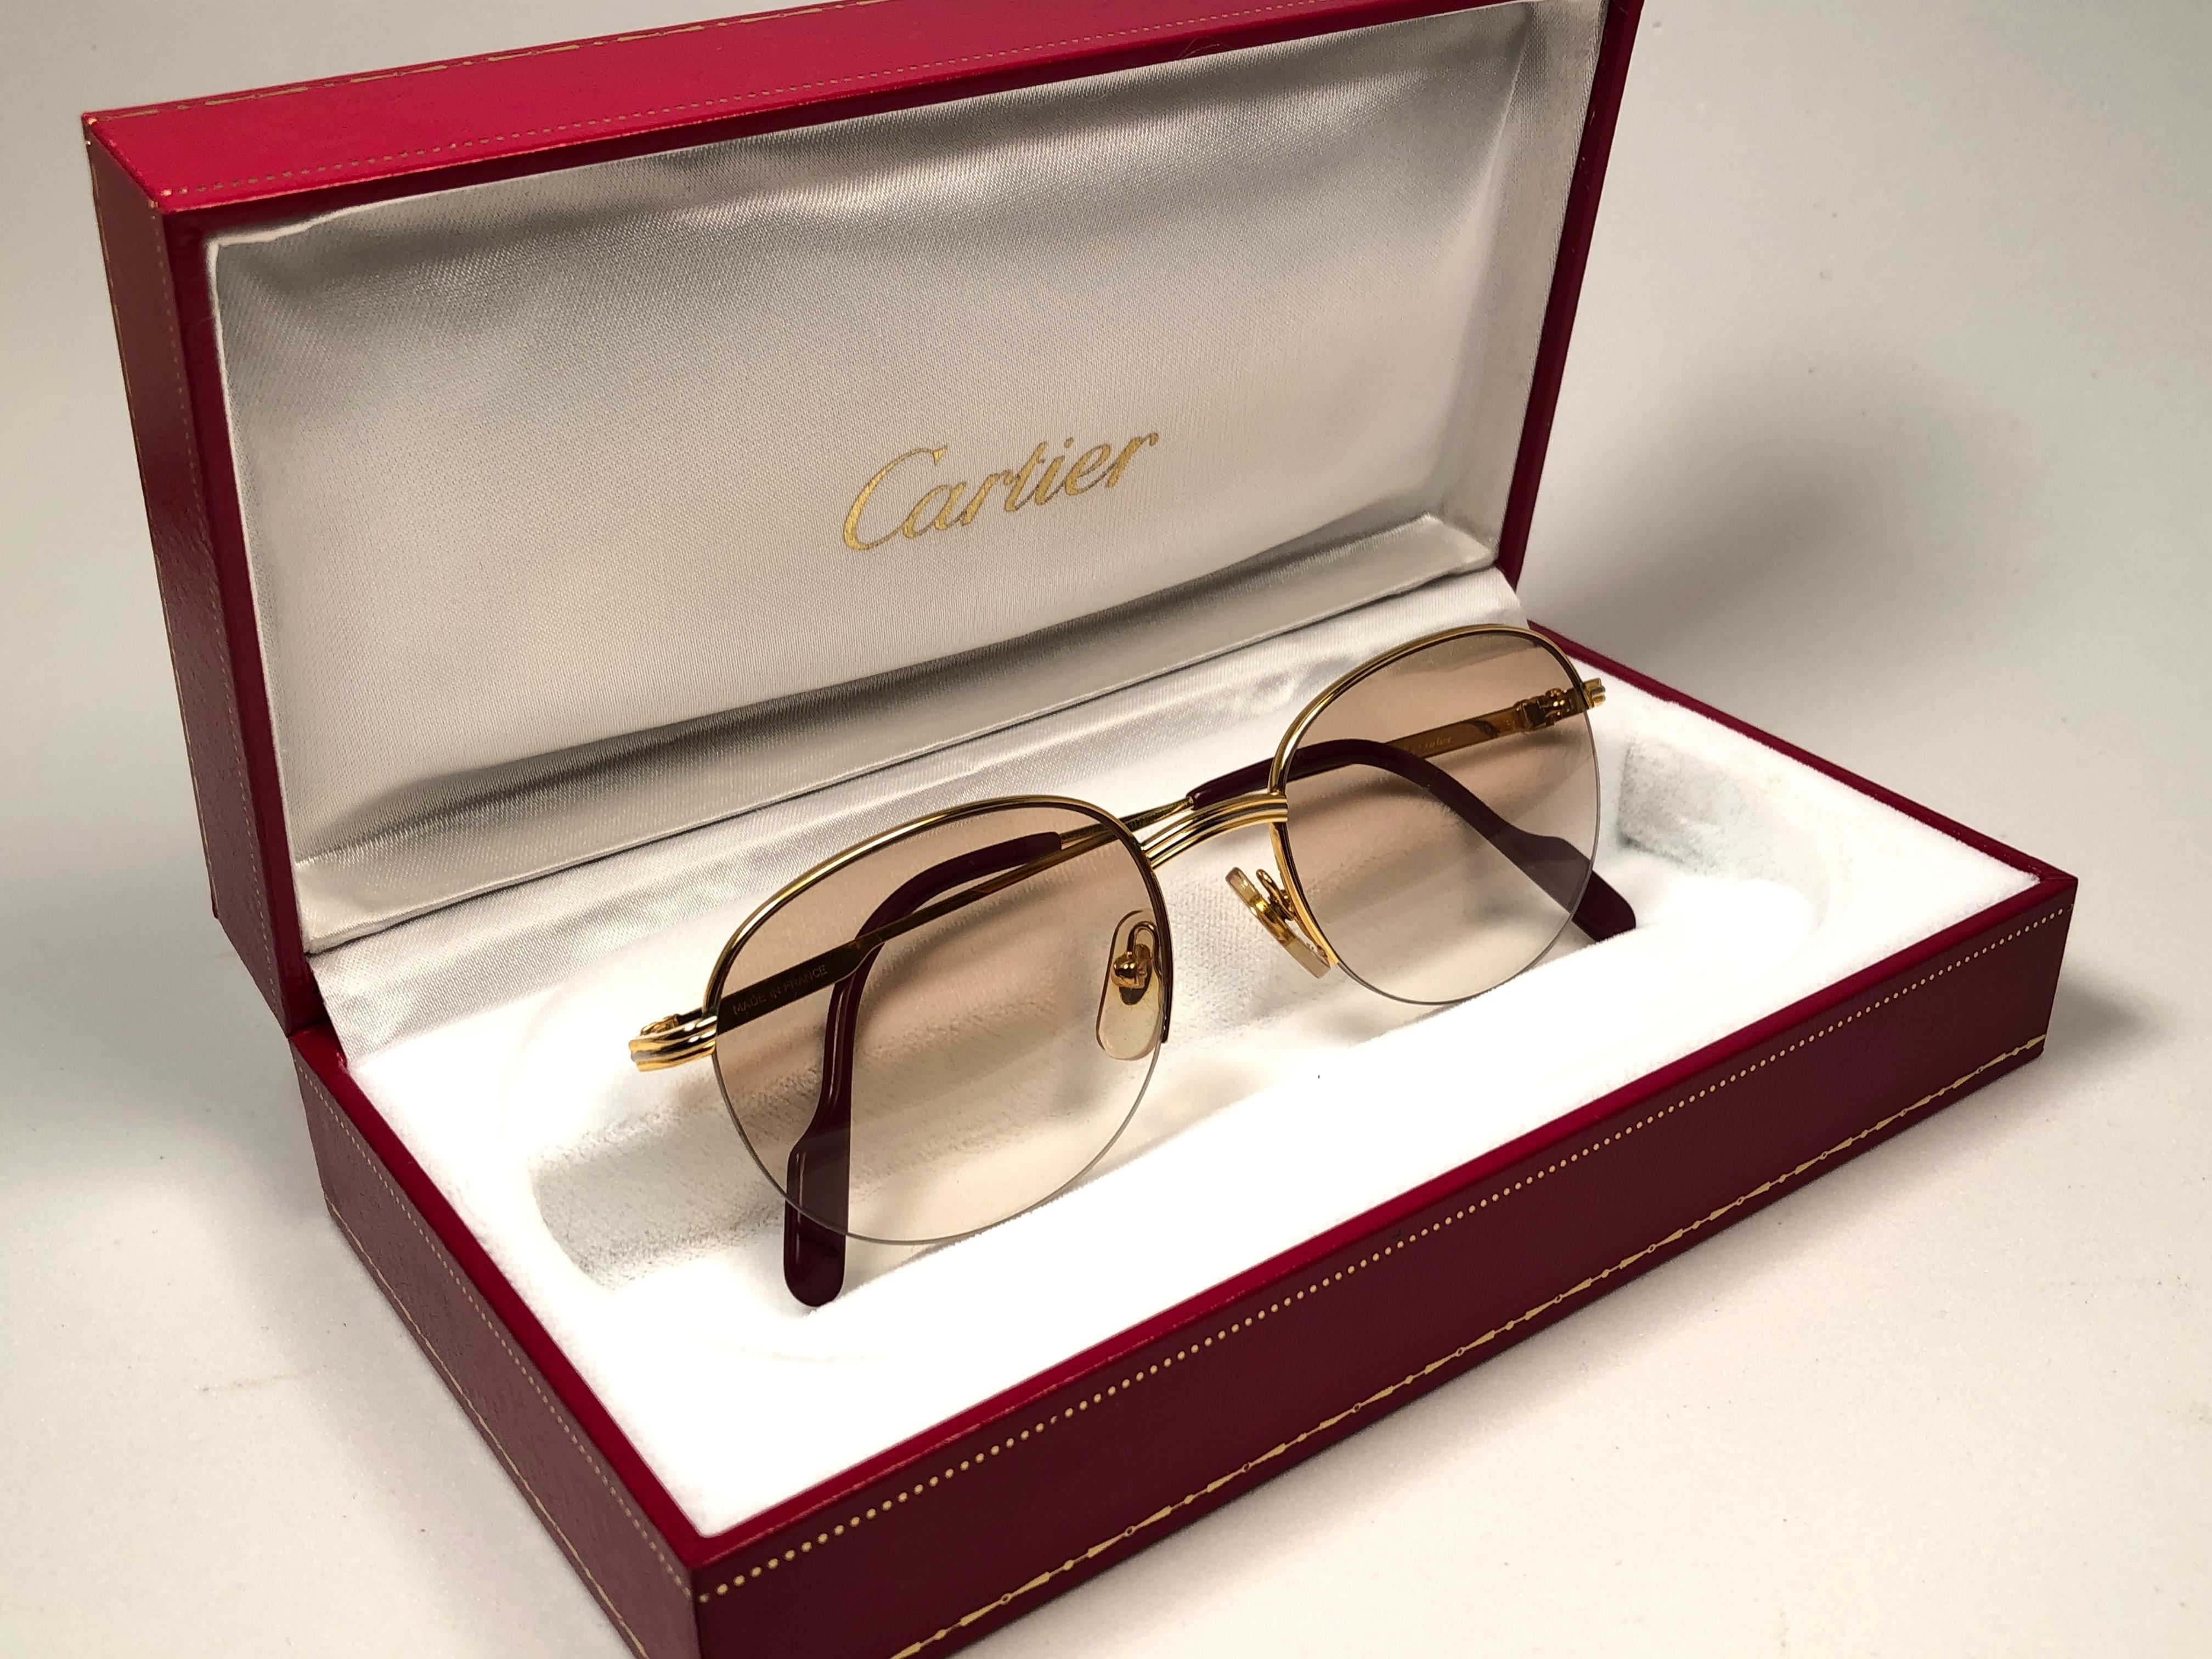 New 1983 Cartier Colisee sunglasses with light gradient (uv protection) lenses. Frame is with the front and sides in yellow and white gold. All hallmarks. Cartier gold signs on the earpaddles. These are like a pair of jewels on your nose with the